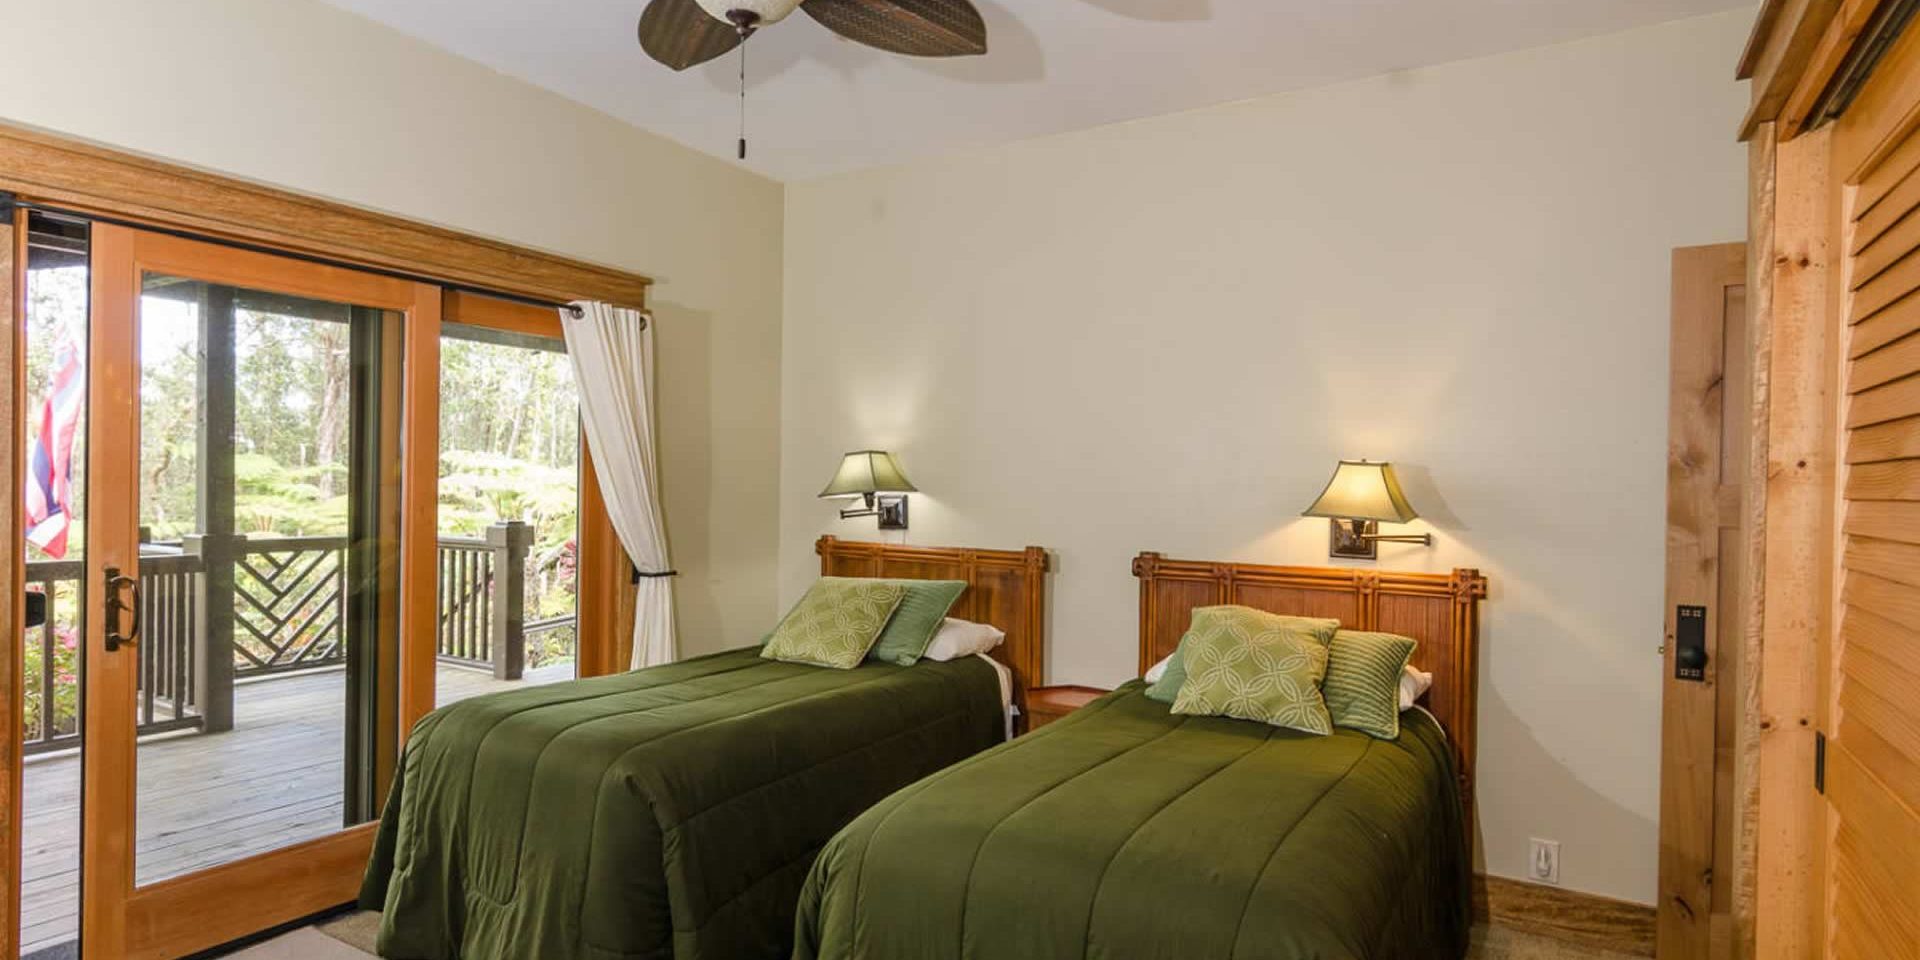 Aloha Room with two twin beds and forest views from private lania